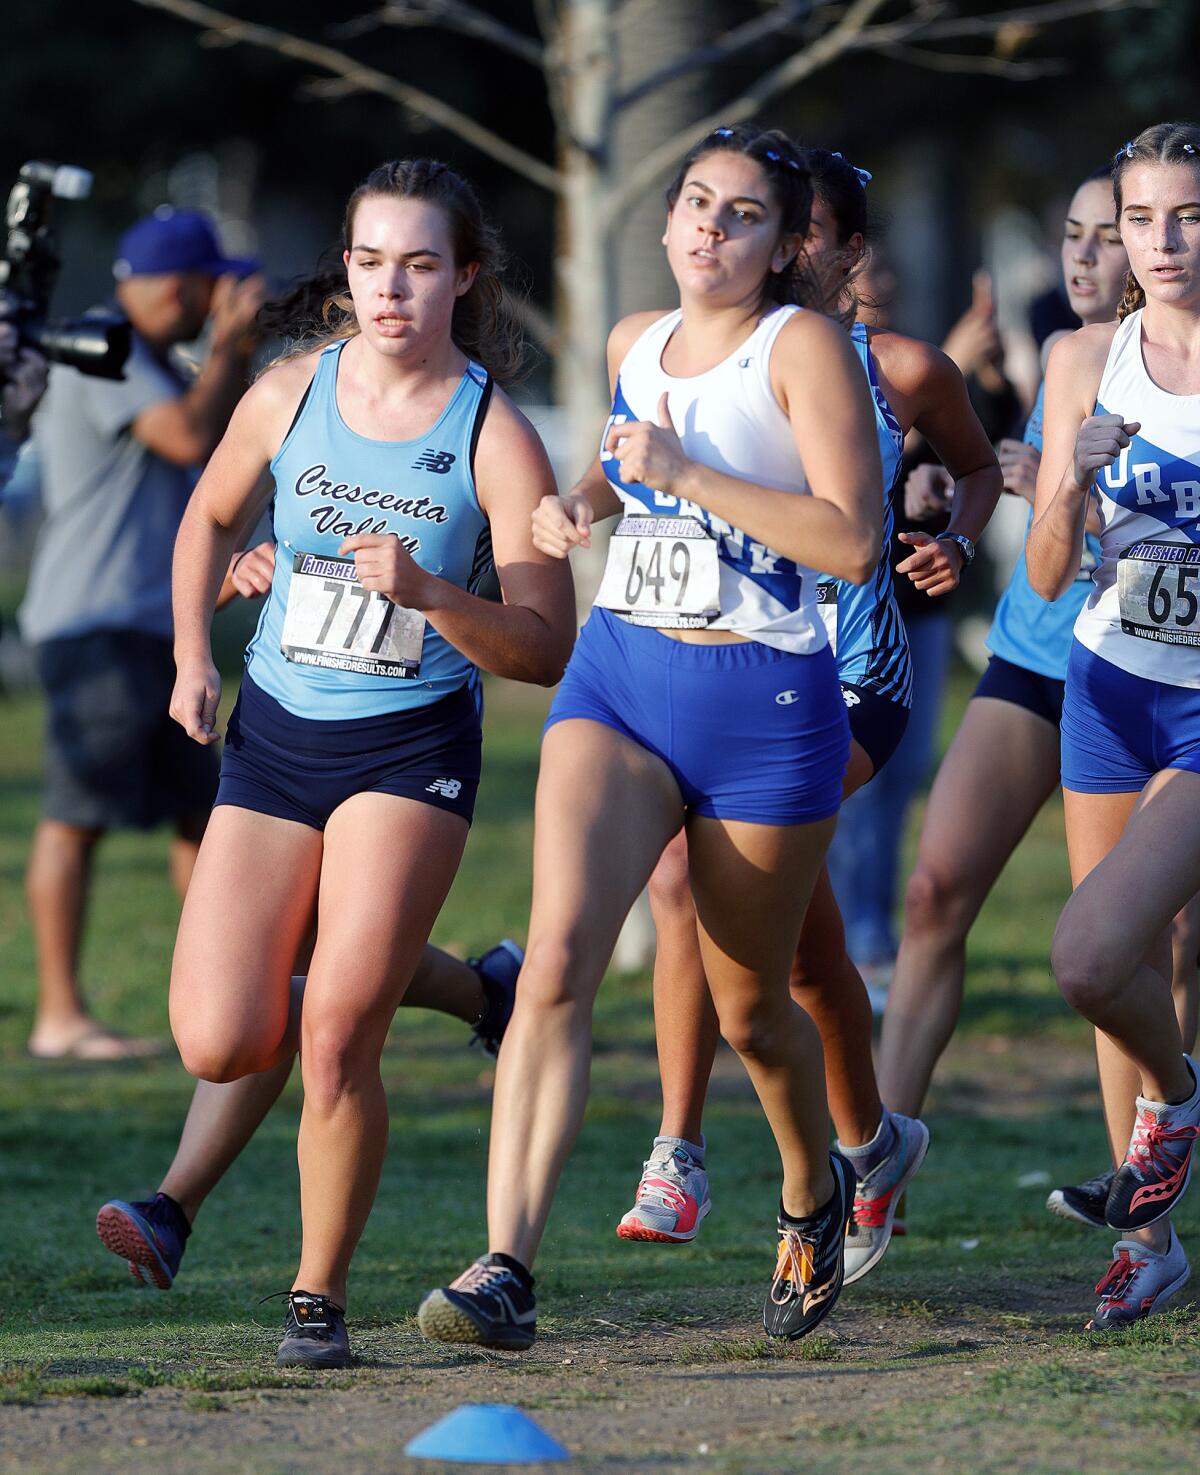 Crescenta Valley's Sophia Atin and Burbank's Sol Fernandez lead the runners at an early turn in a Pacific League cross country meet at Arcadia Park in Arcadia on Thursday, November 7, 2019. This is the final league meet of the season.